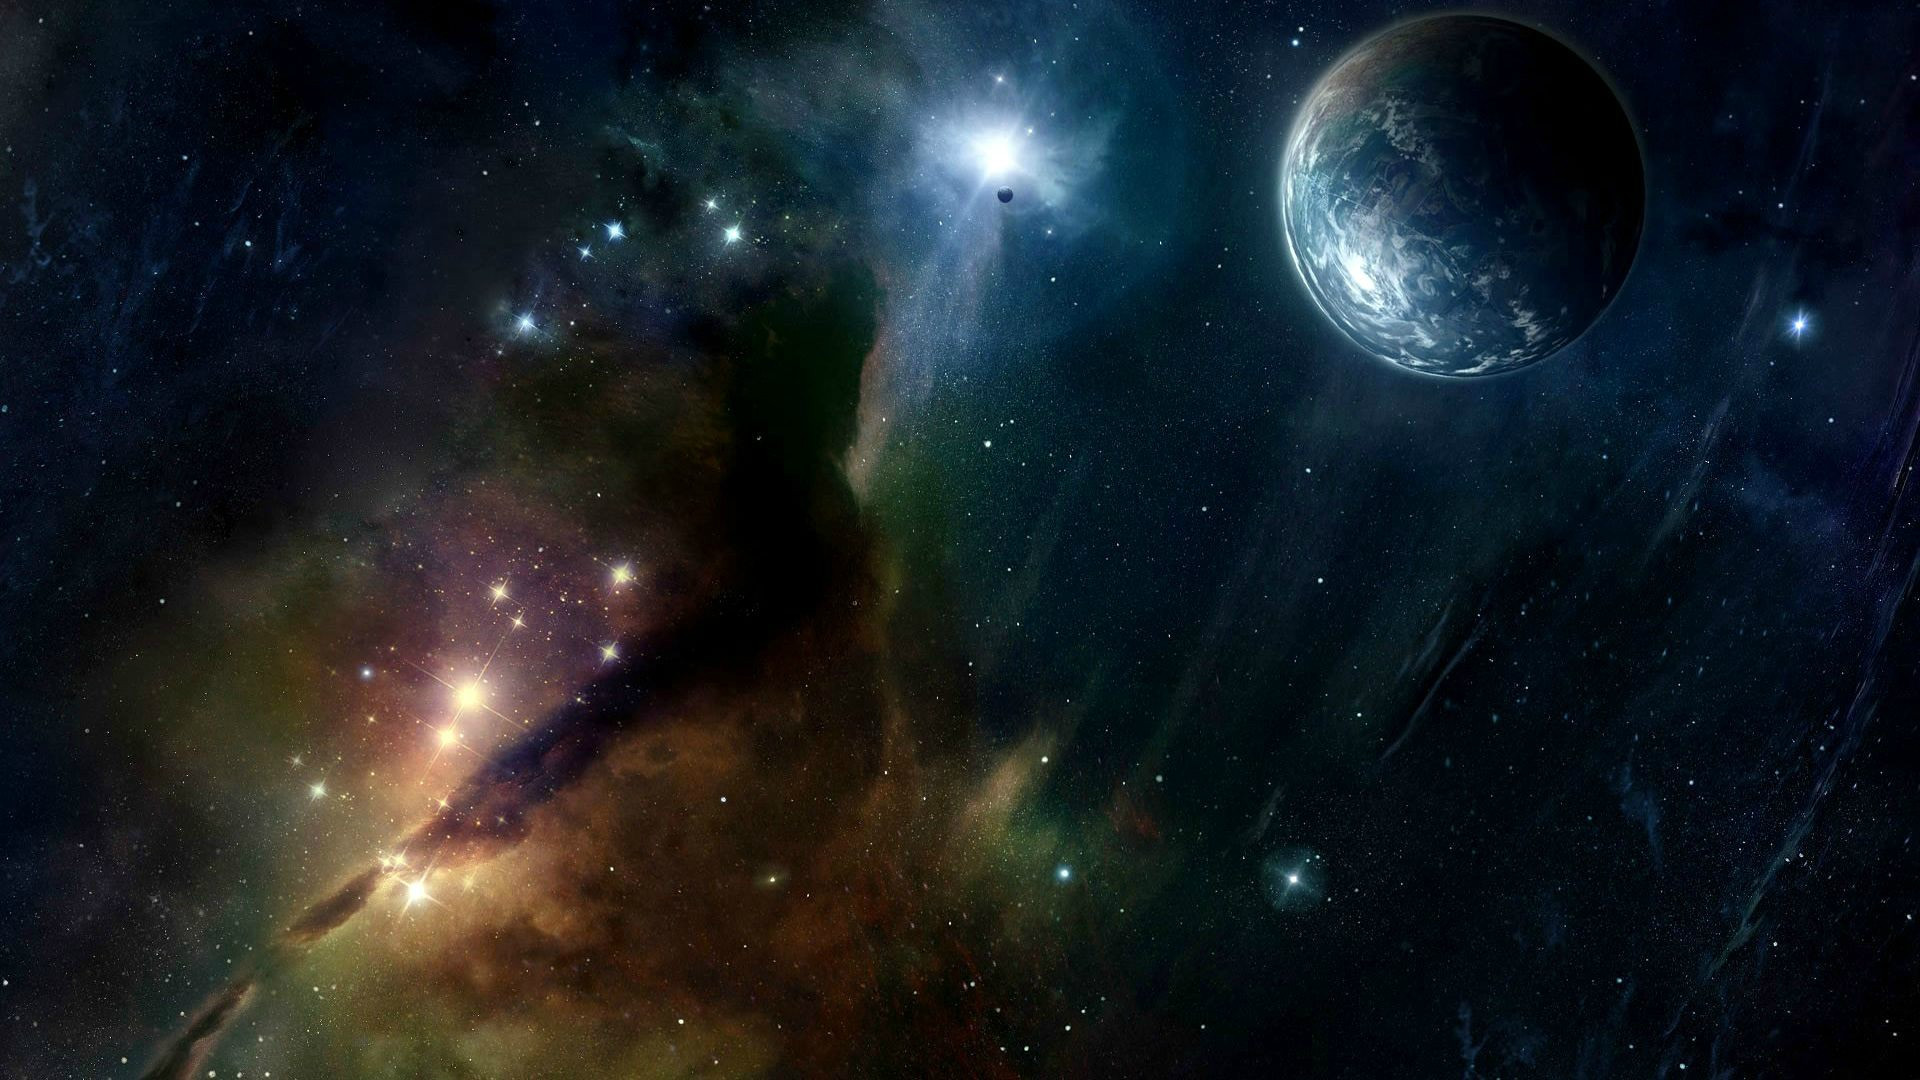 And This Is The Actual Wallpaper - Space Background Images Free , HD Wallpaper & Backgrounds